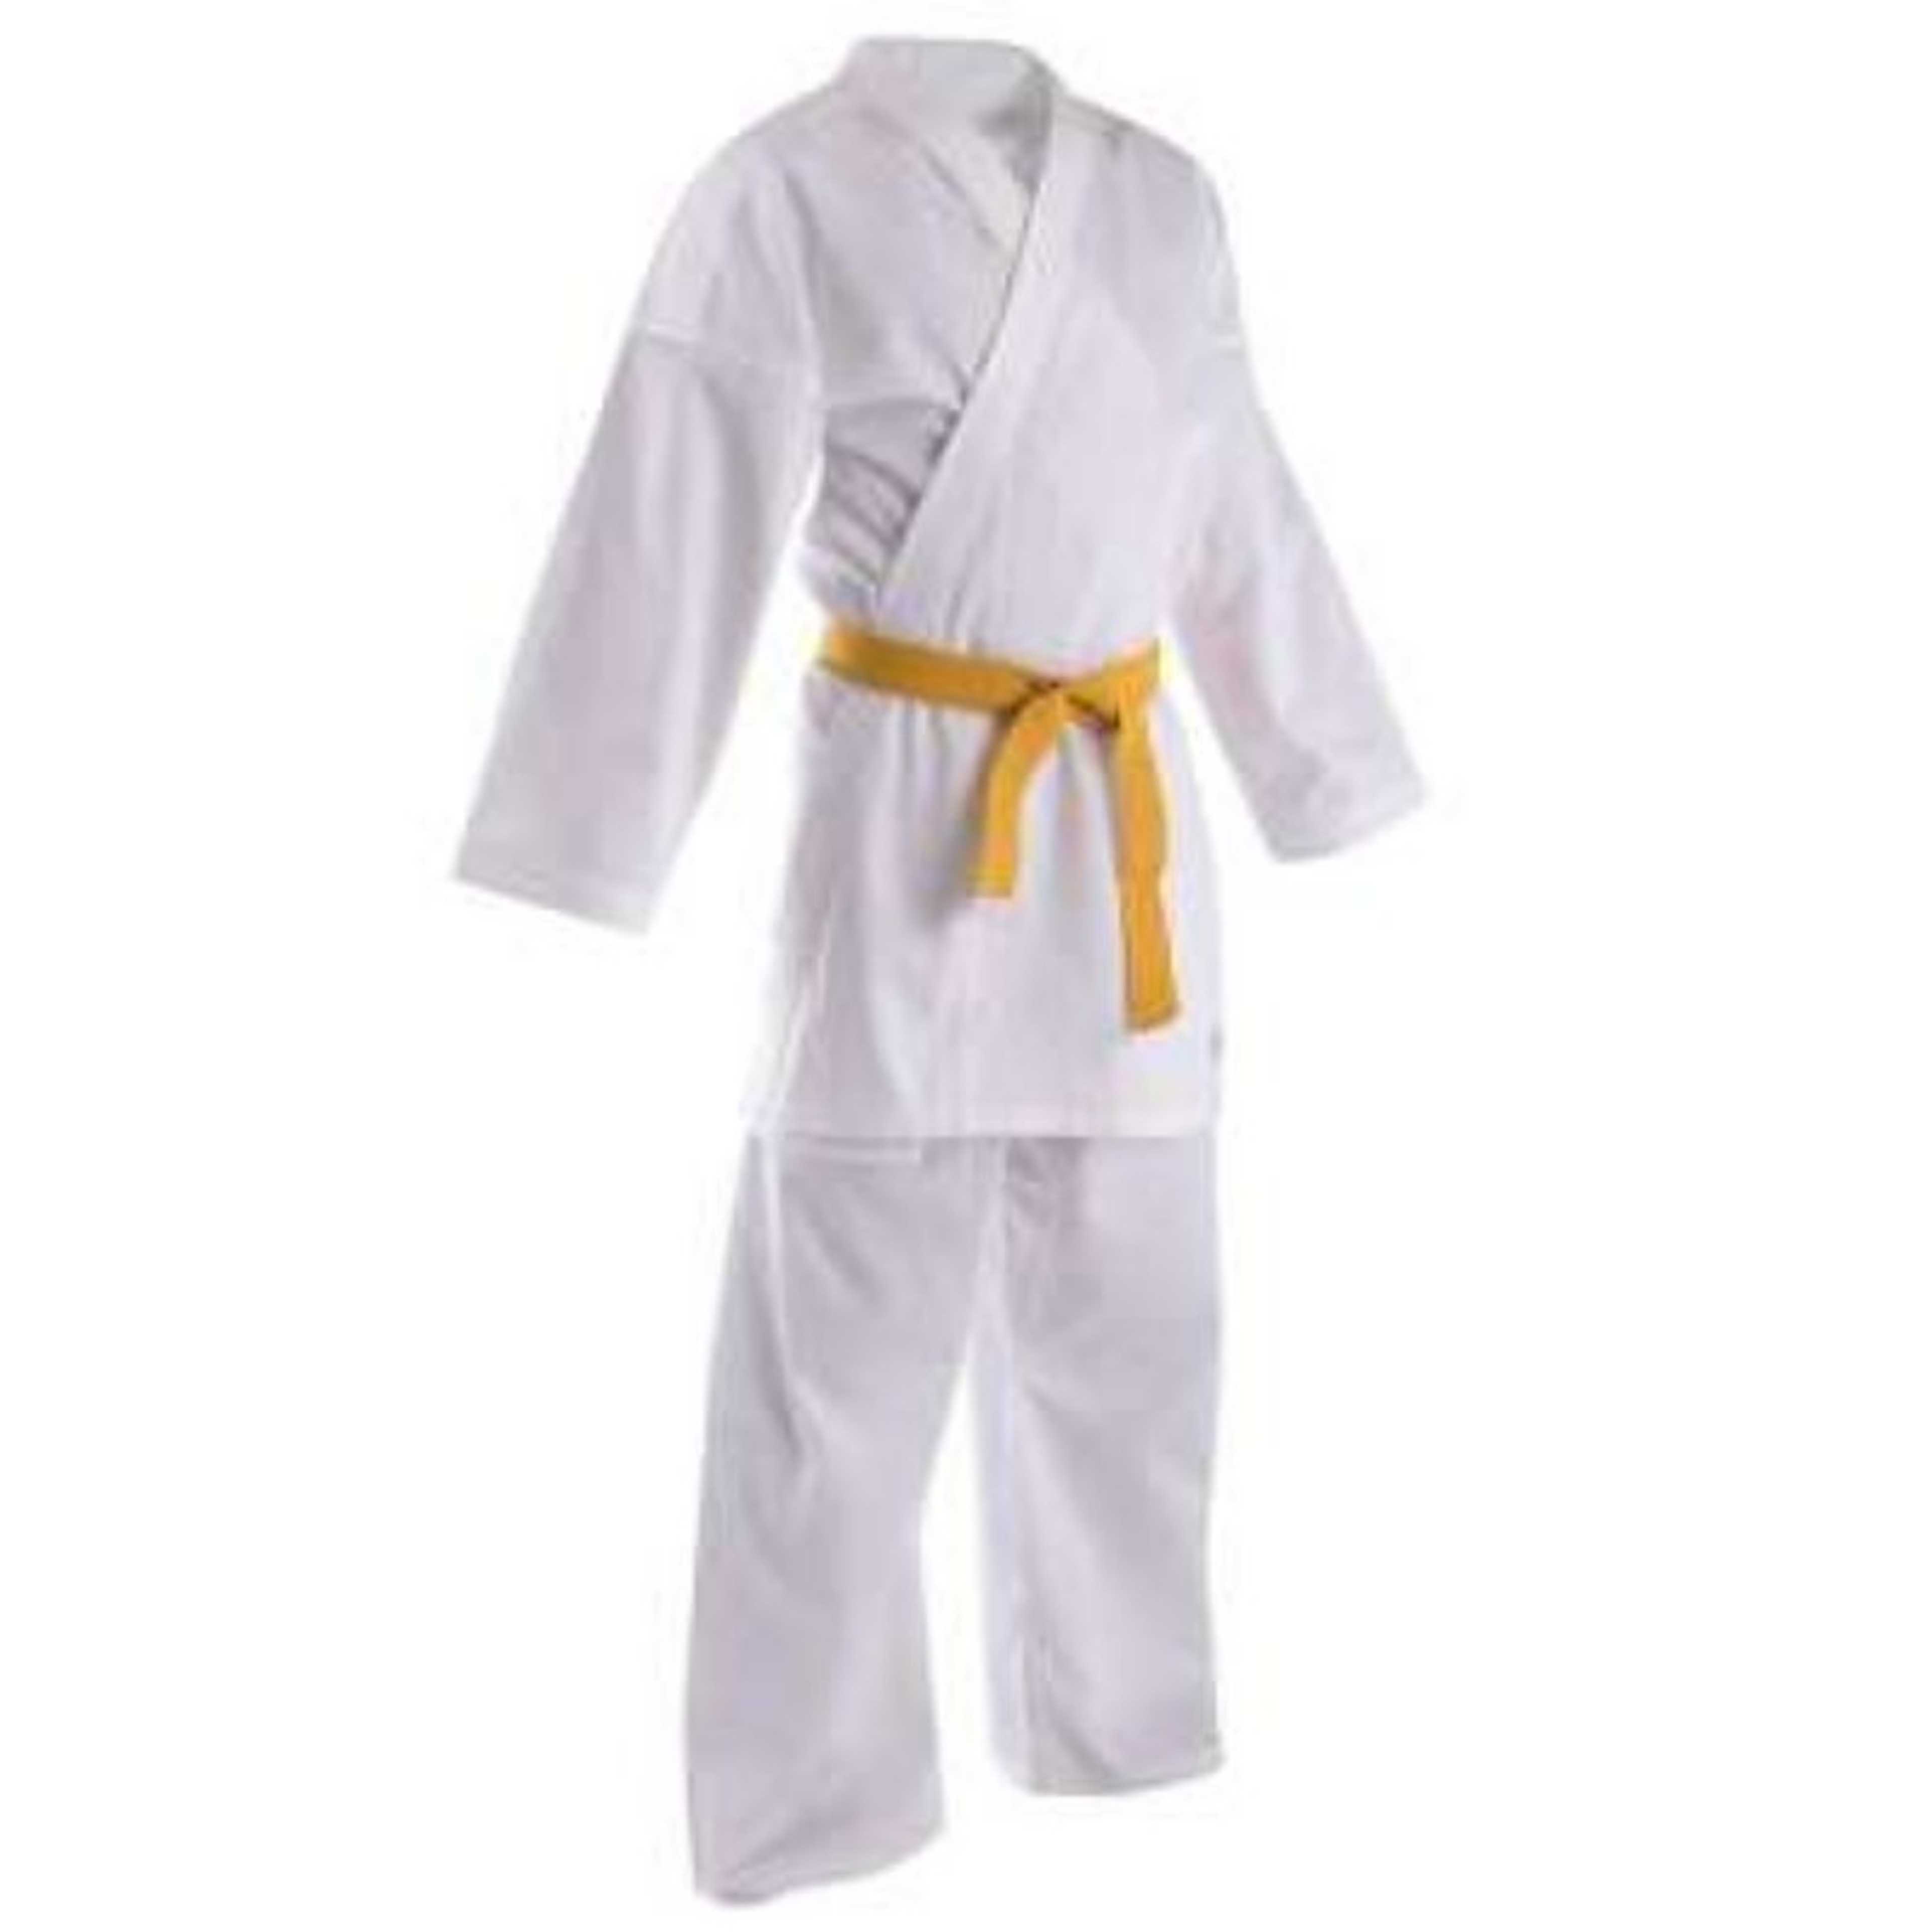 Export Quality Karate Dress Kit No 000 with Yellow Belt